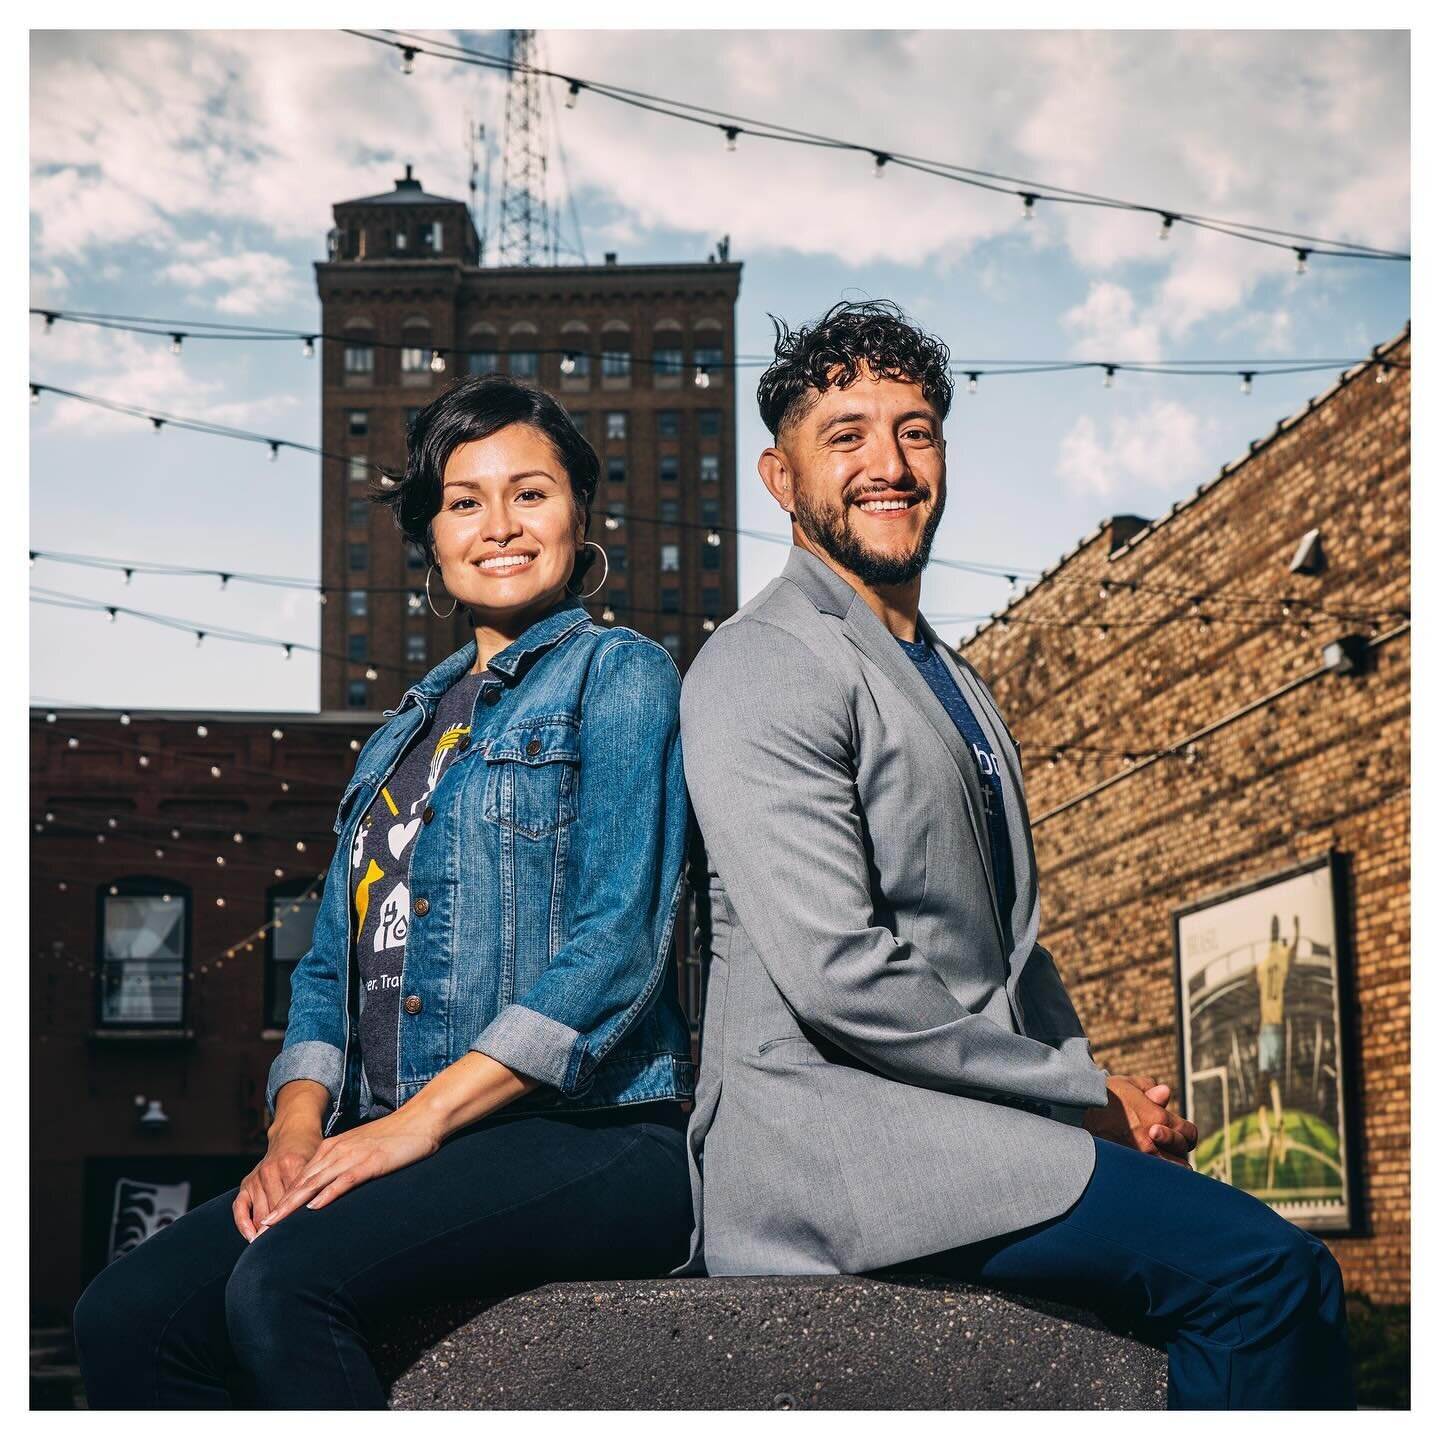 Editorial portraits made last autumn for Aurora University Magazine which had me reminiscing of the days I photographed environmental portraits regularly for Chicago Reader. Still love these assignments; catching a glimpse into people&rsquo;s lives, 